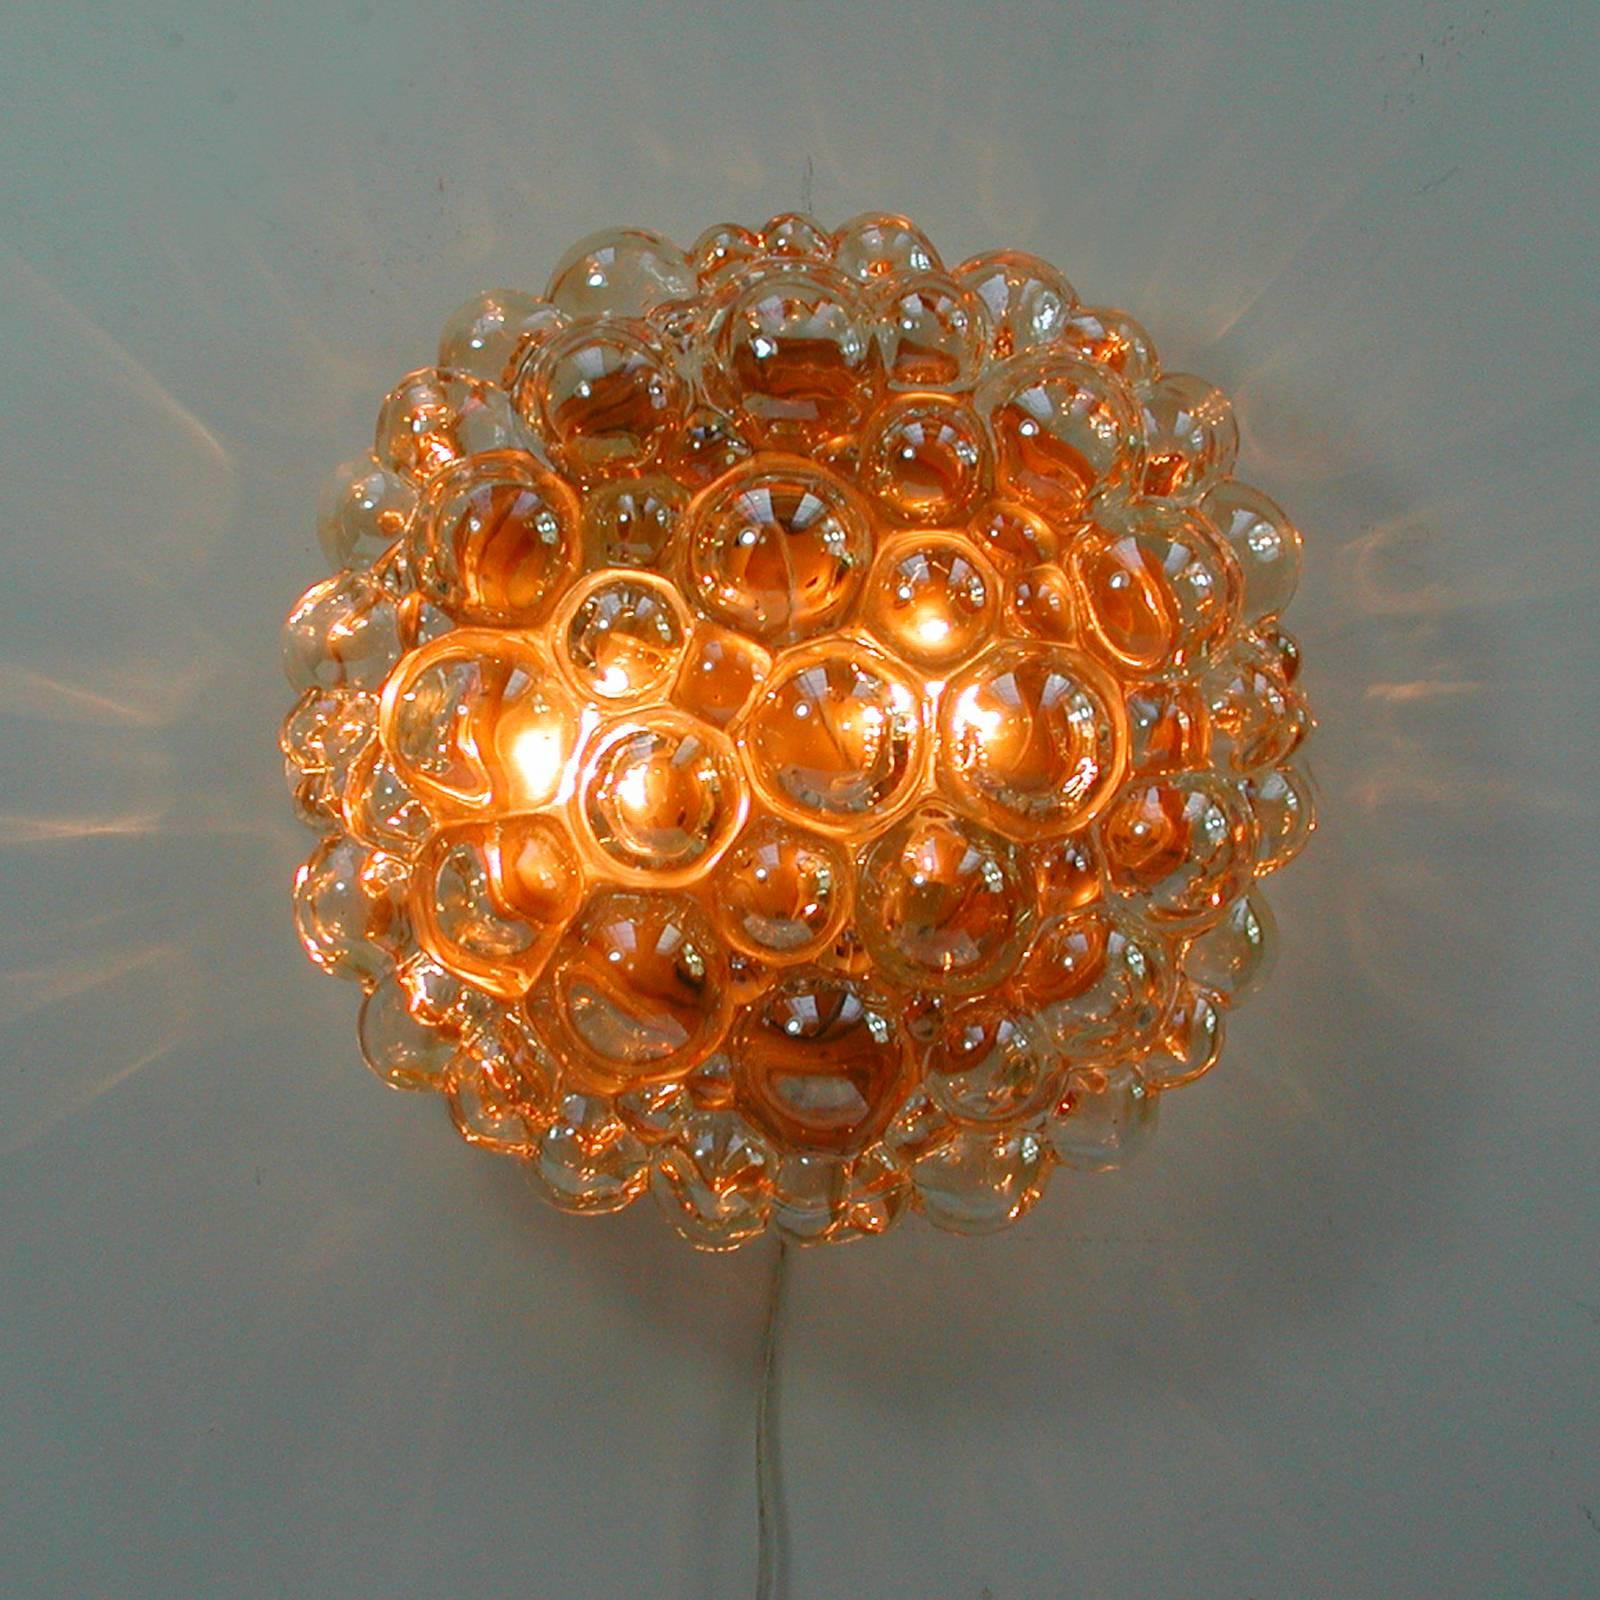 Beautiful large bubble sconce or wall light or flush mount by Helena Tynell for Glashütte Limburg, Germany, 1960s.
Made of glossy amber colored glass with a gilt colored base. Two E27 bulbs required. New ceramic bulb holders and rewired.